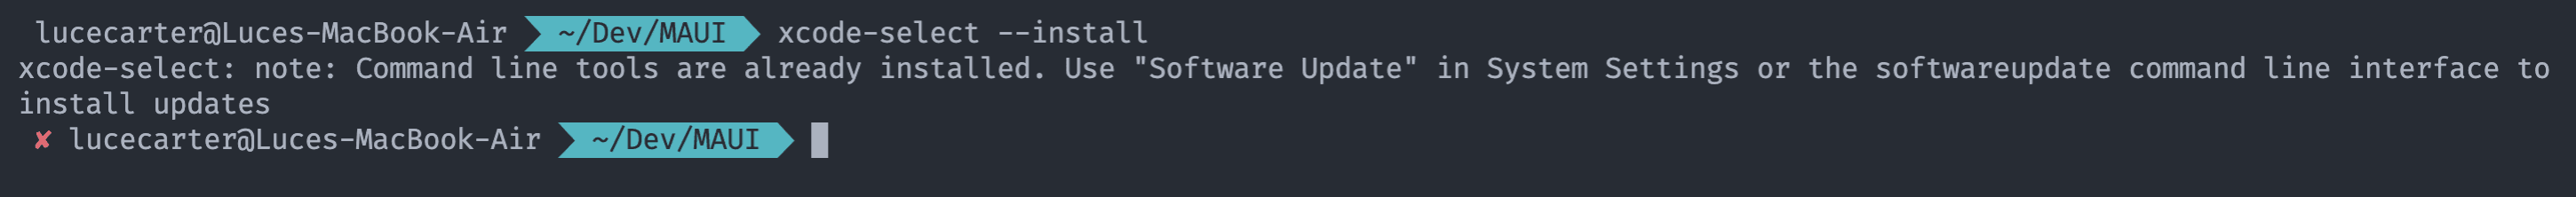 CLI messaged that the xcode select tools are already installed.